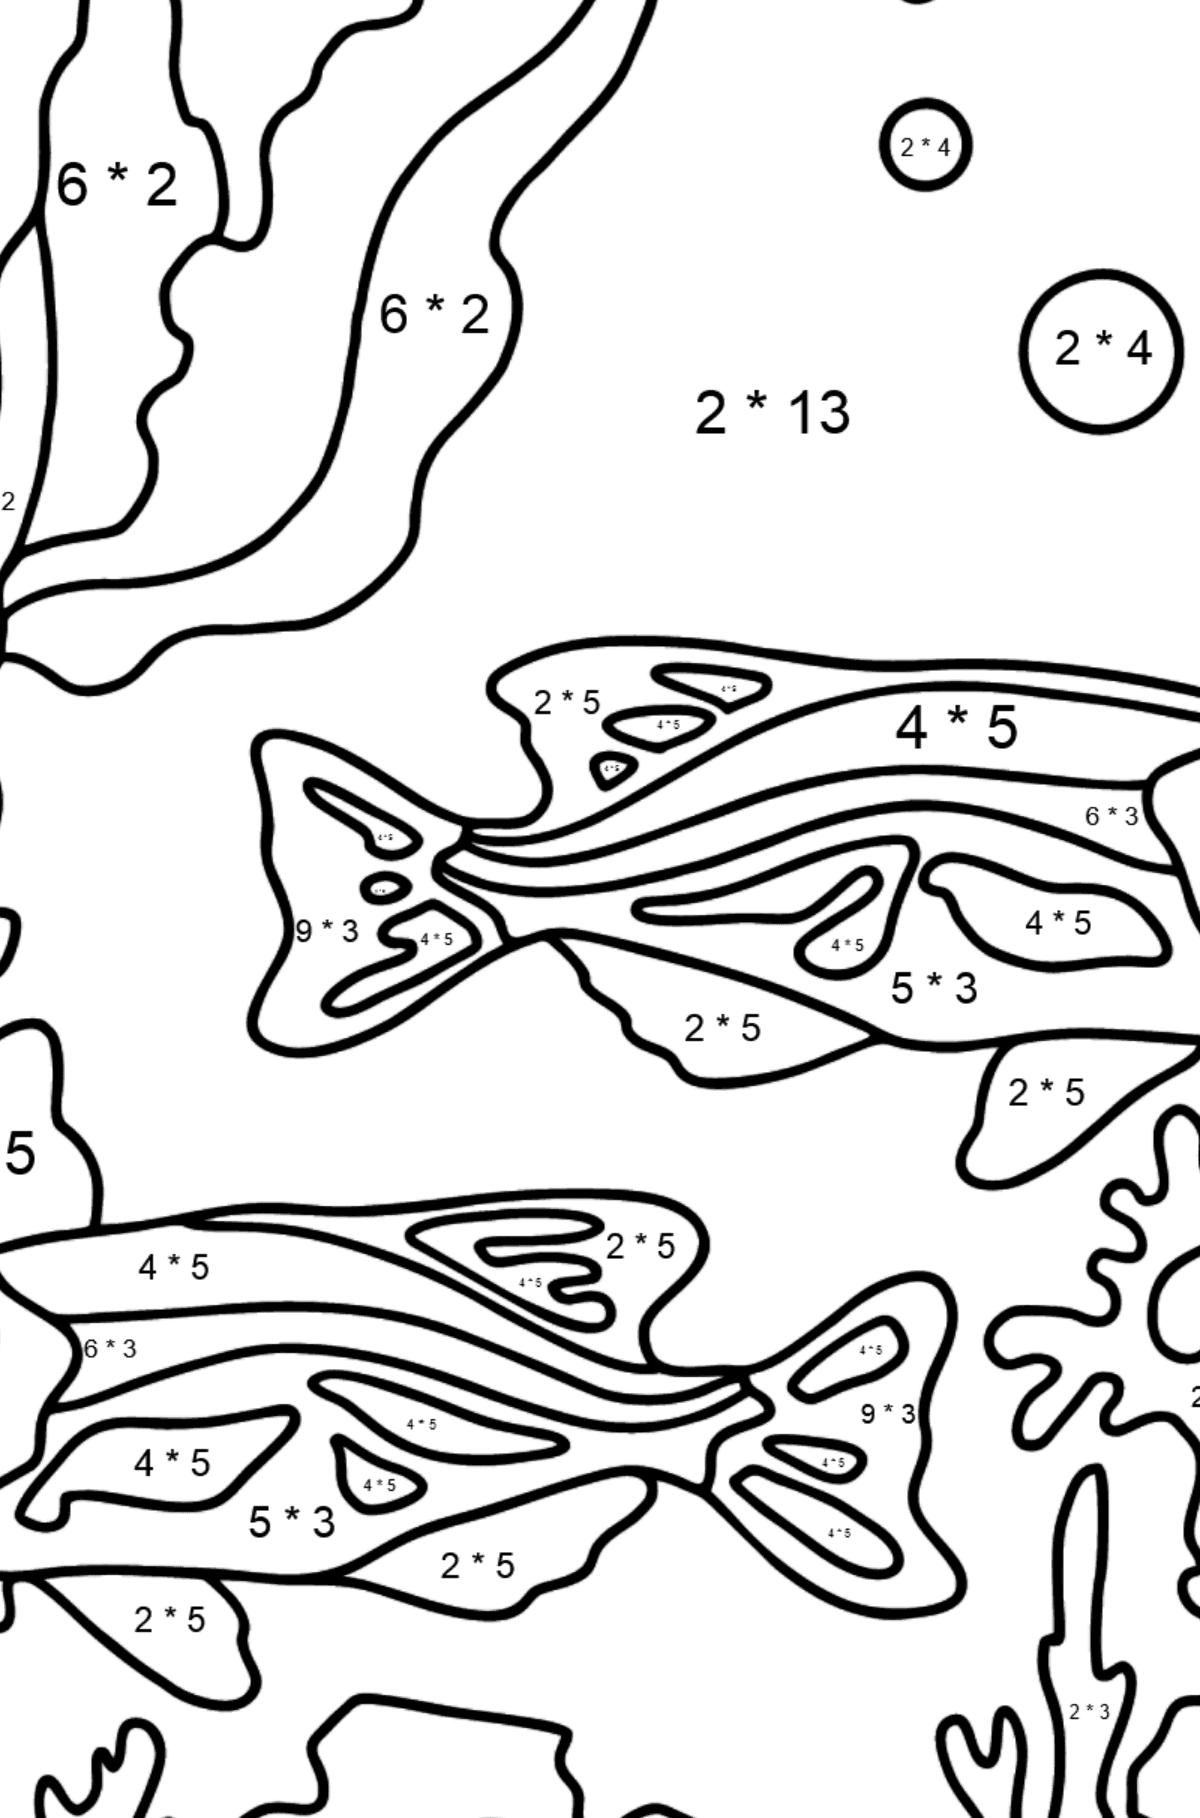 Two Fish Coloring Page - Fish are Swimming Beautifully - Math Coloring - Multiplication for Kids